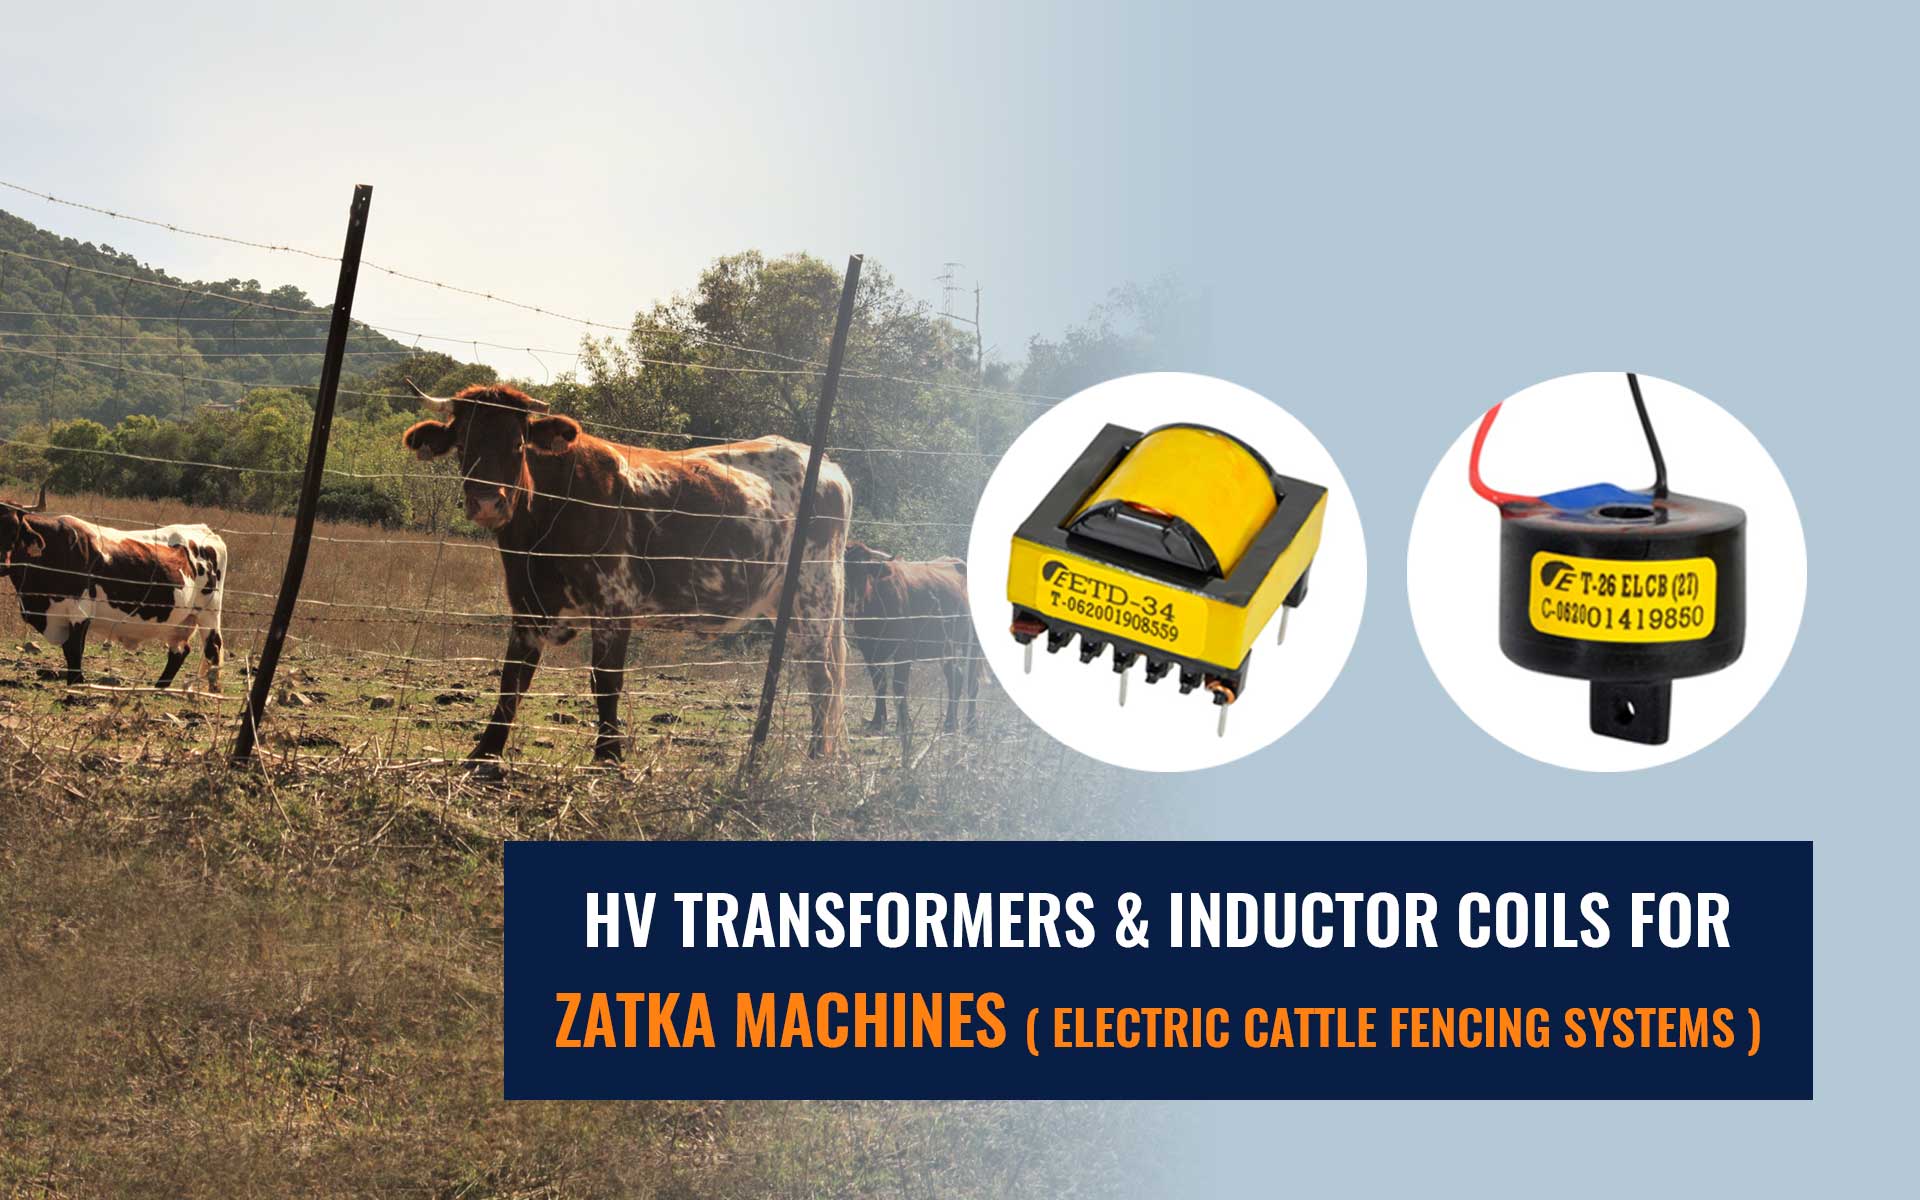 HV Transformers & Inductor Coils for Zatka Machines